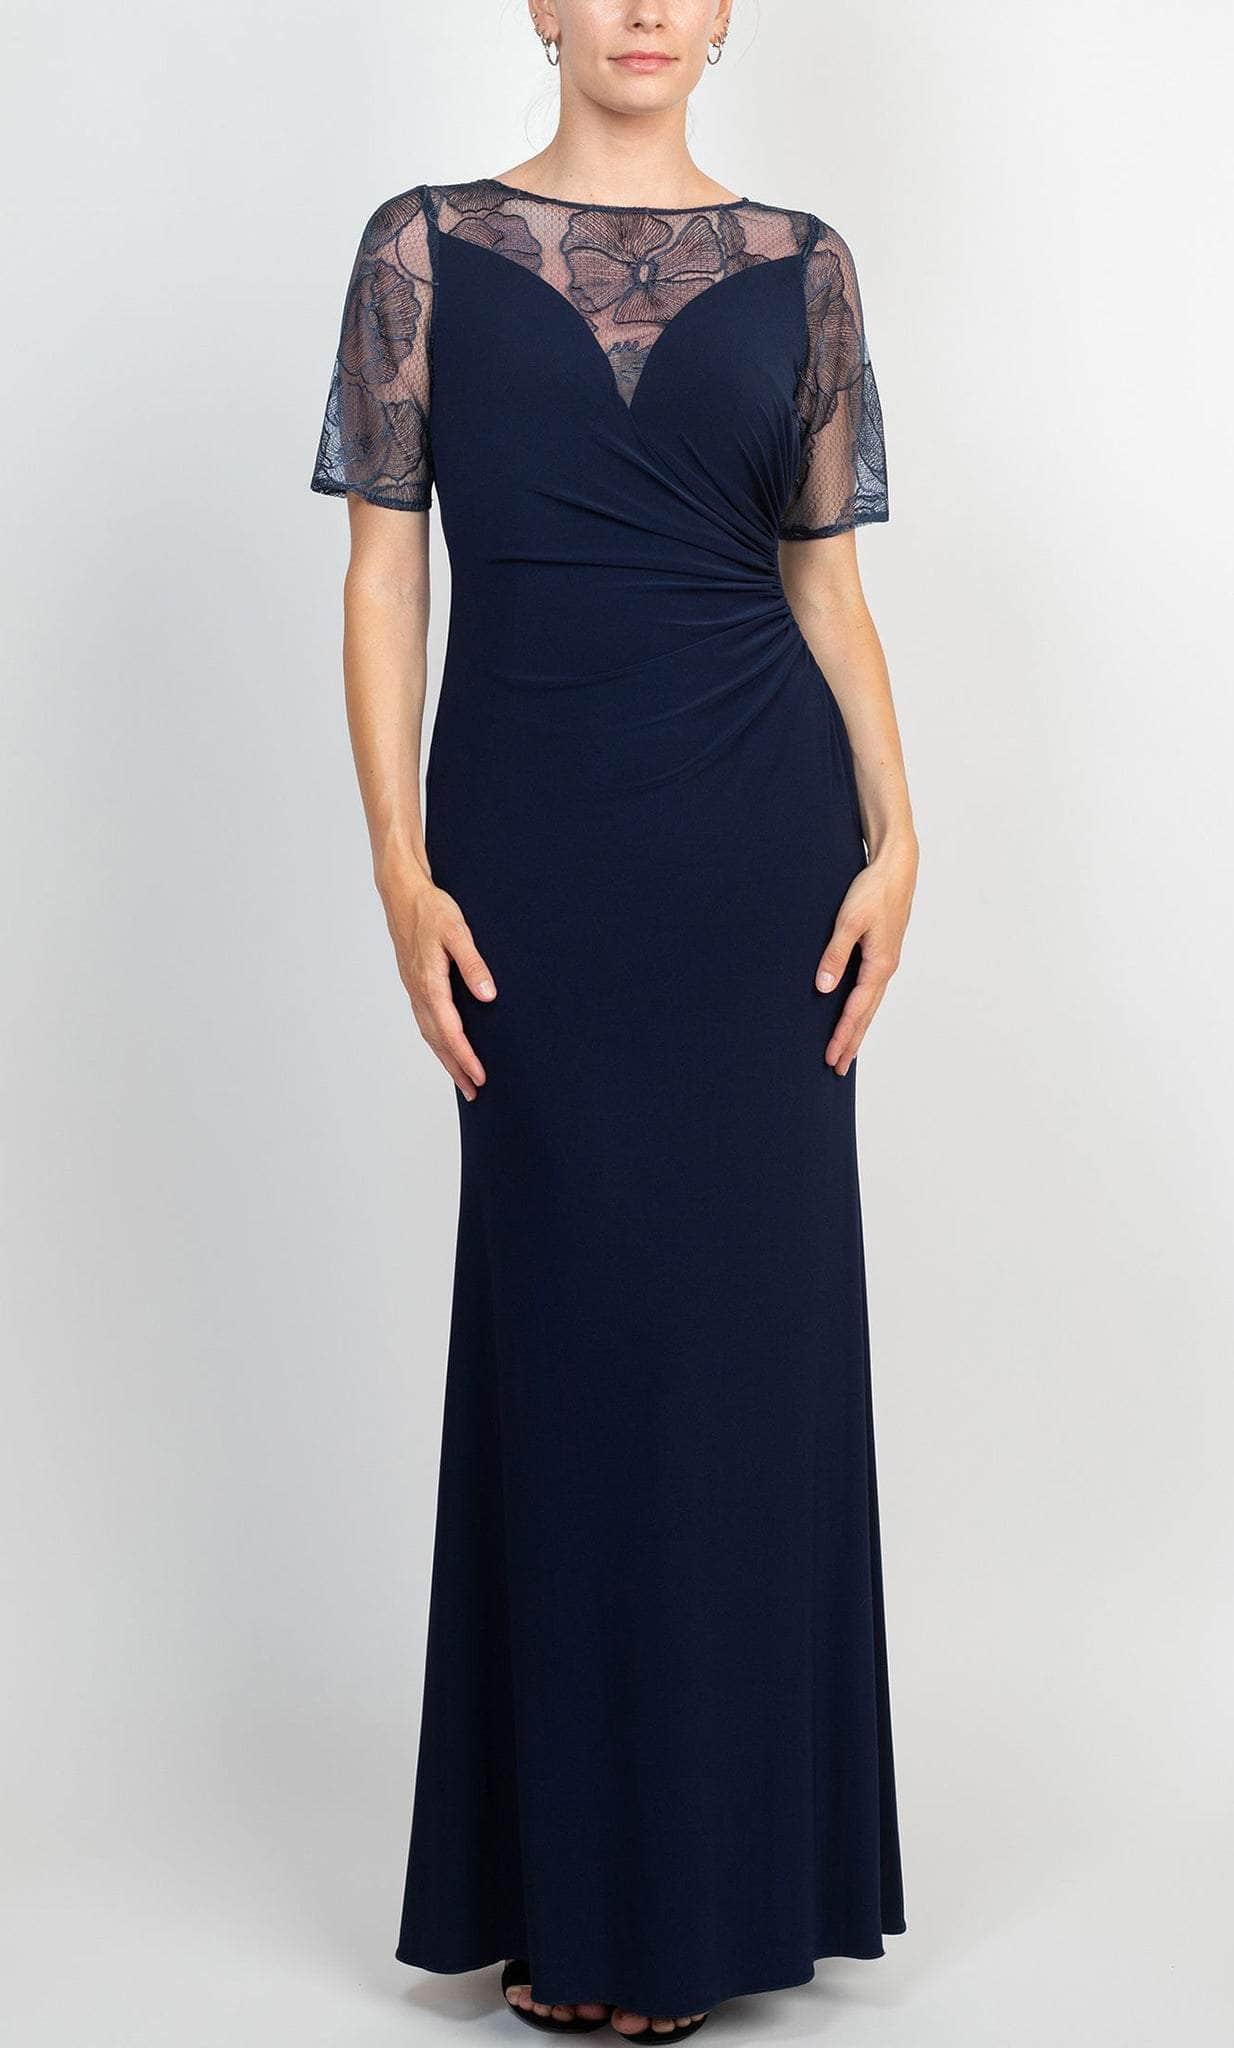 Image of Adrianna Papell AP1E208992 - Illusion Neck Gown